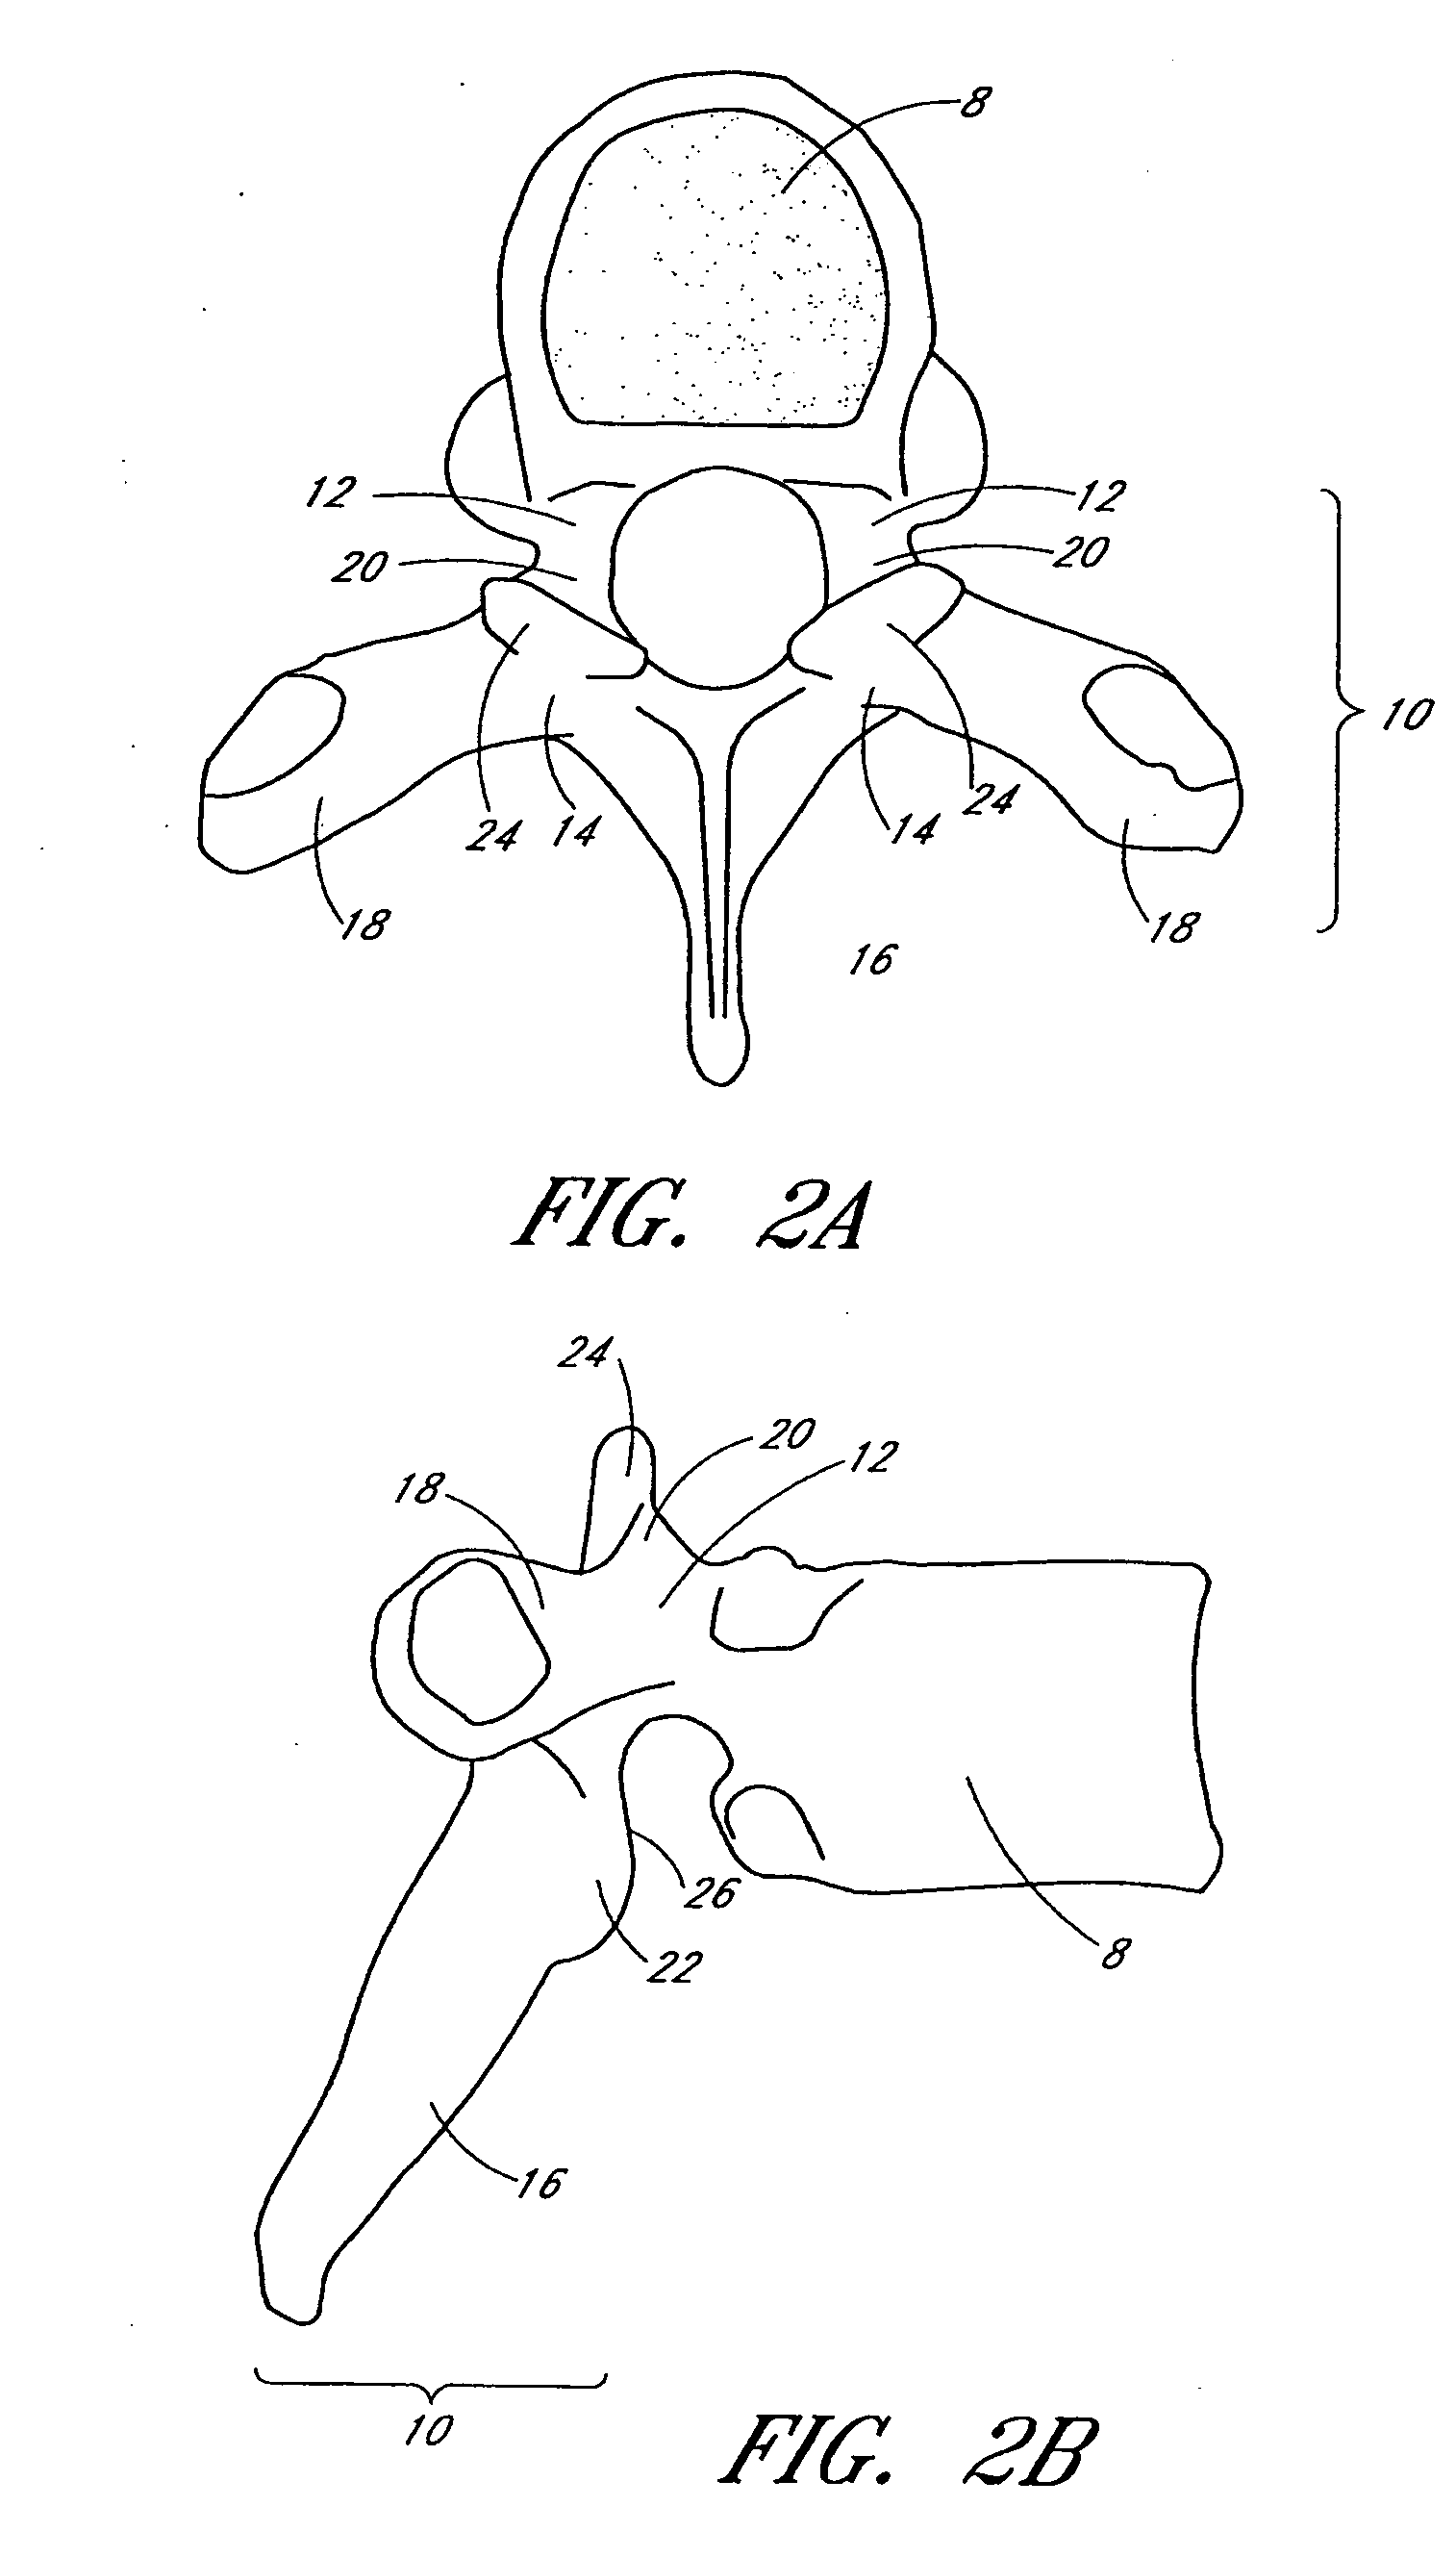 Flanged interbody fusion device with oblong fastener apertures